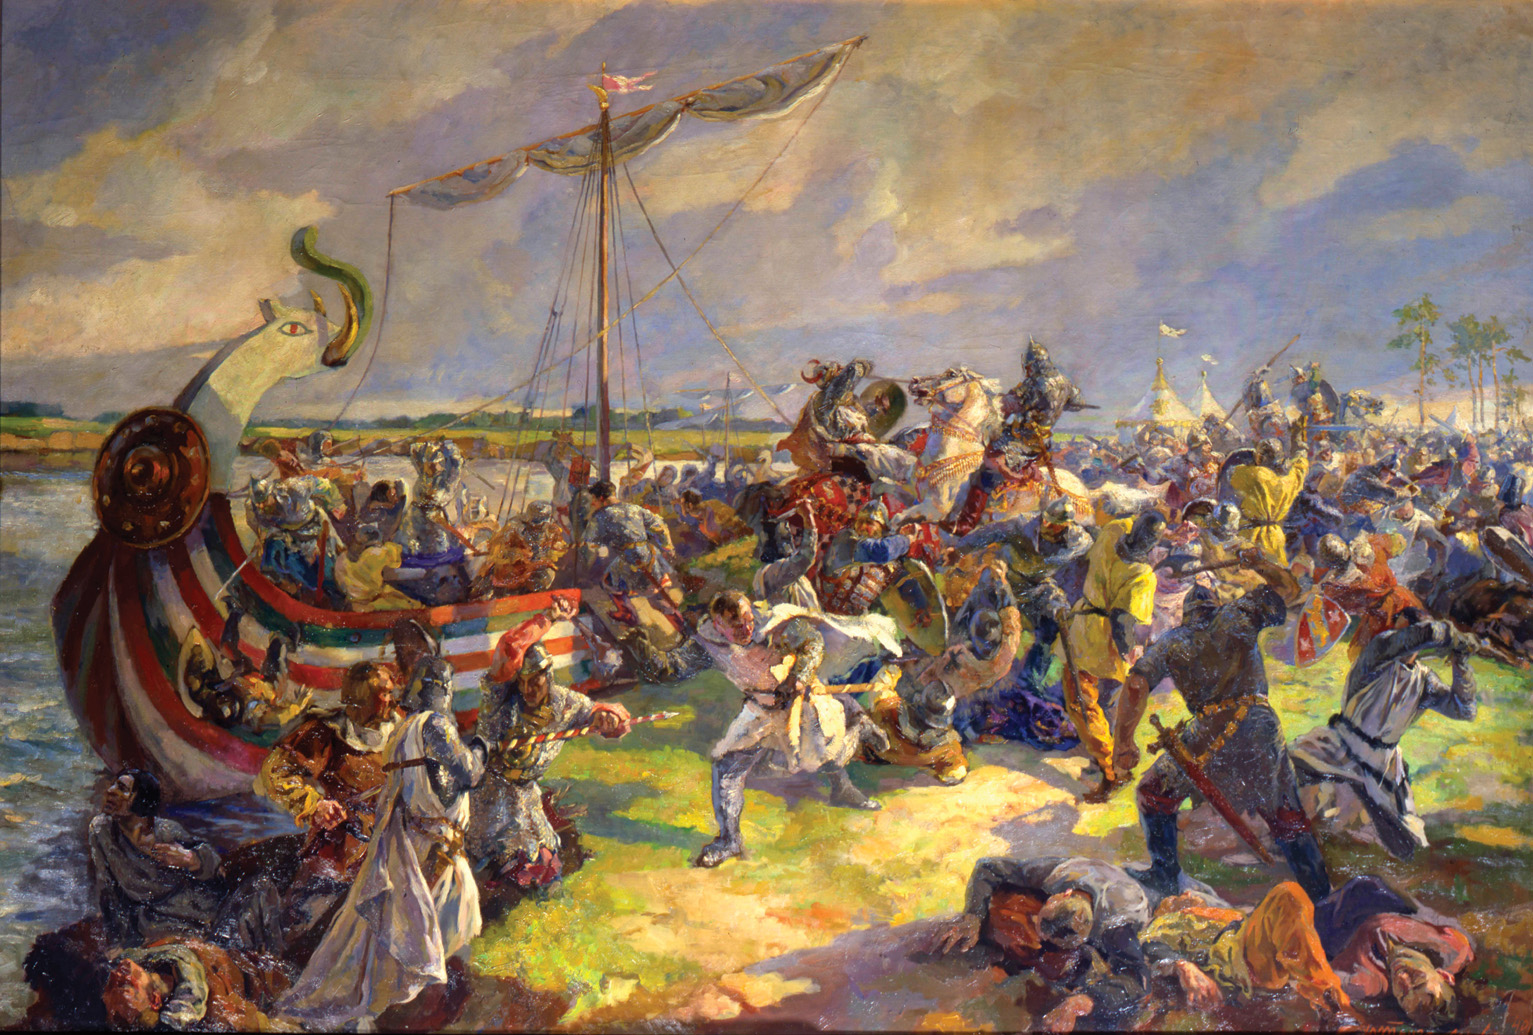 Alexander Nevsky launches a surprise attacks against the Swedish camp on the Neva River in July 1240.